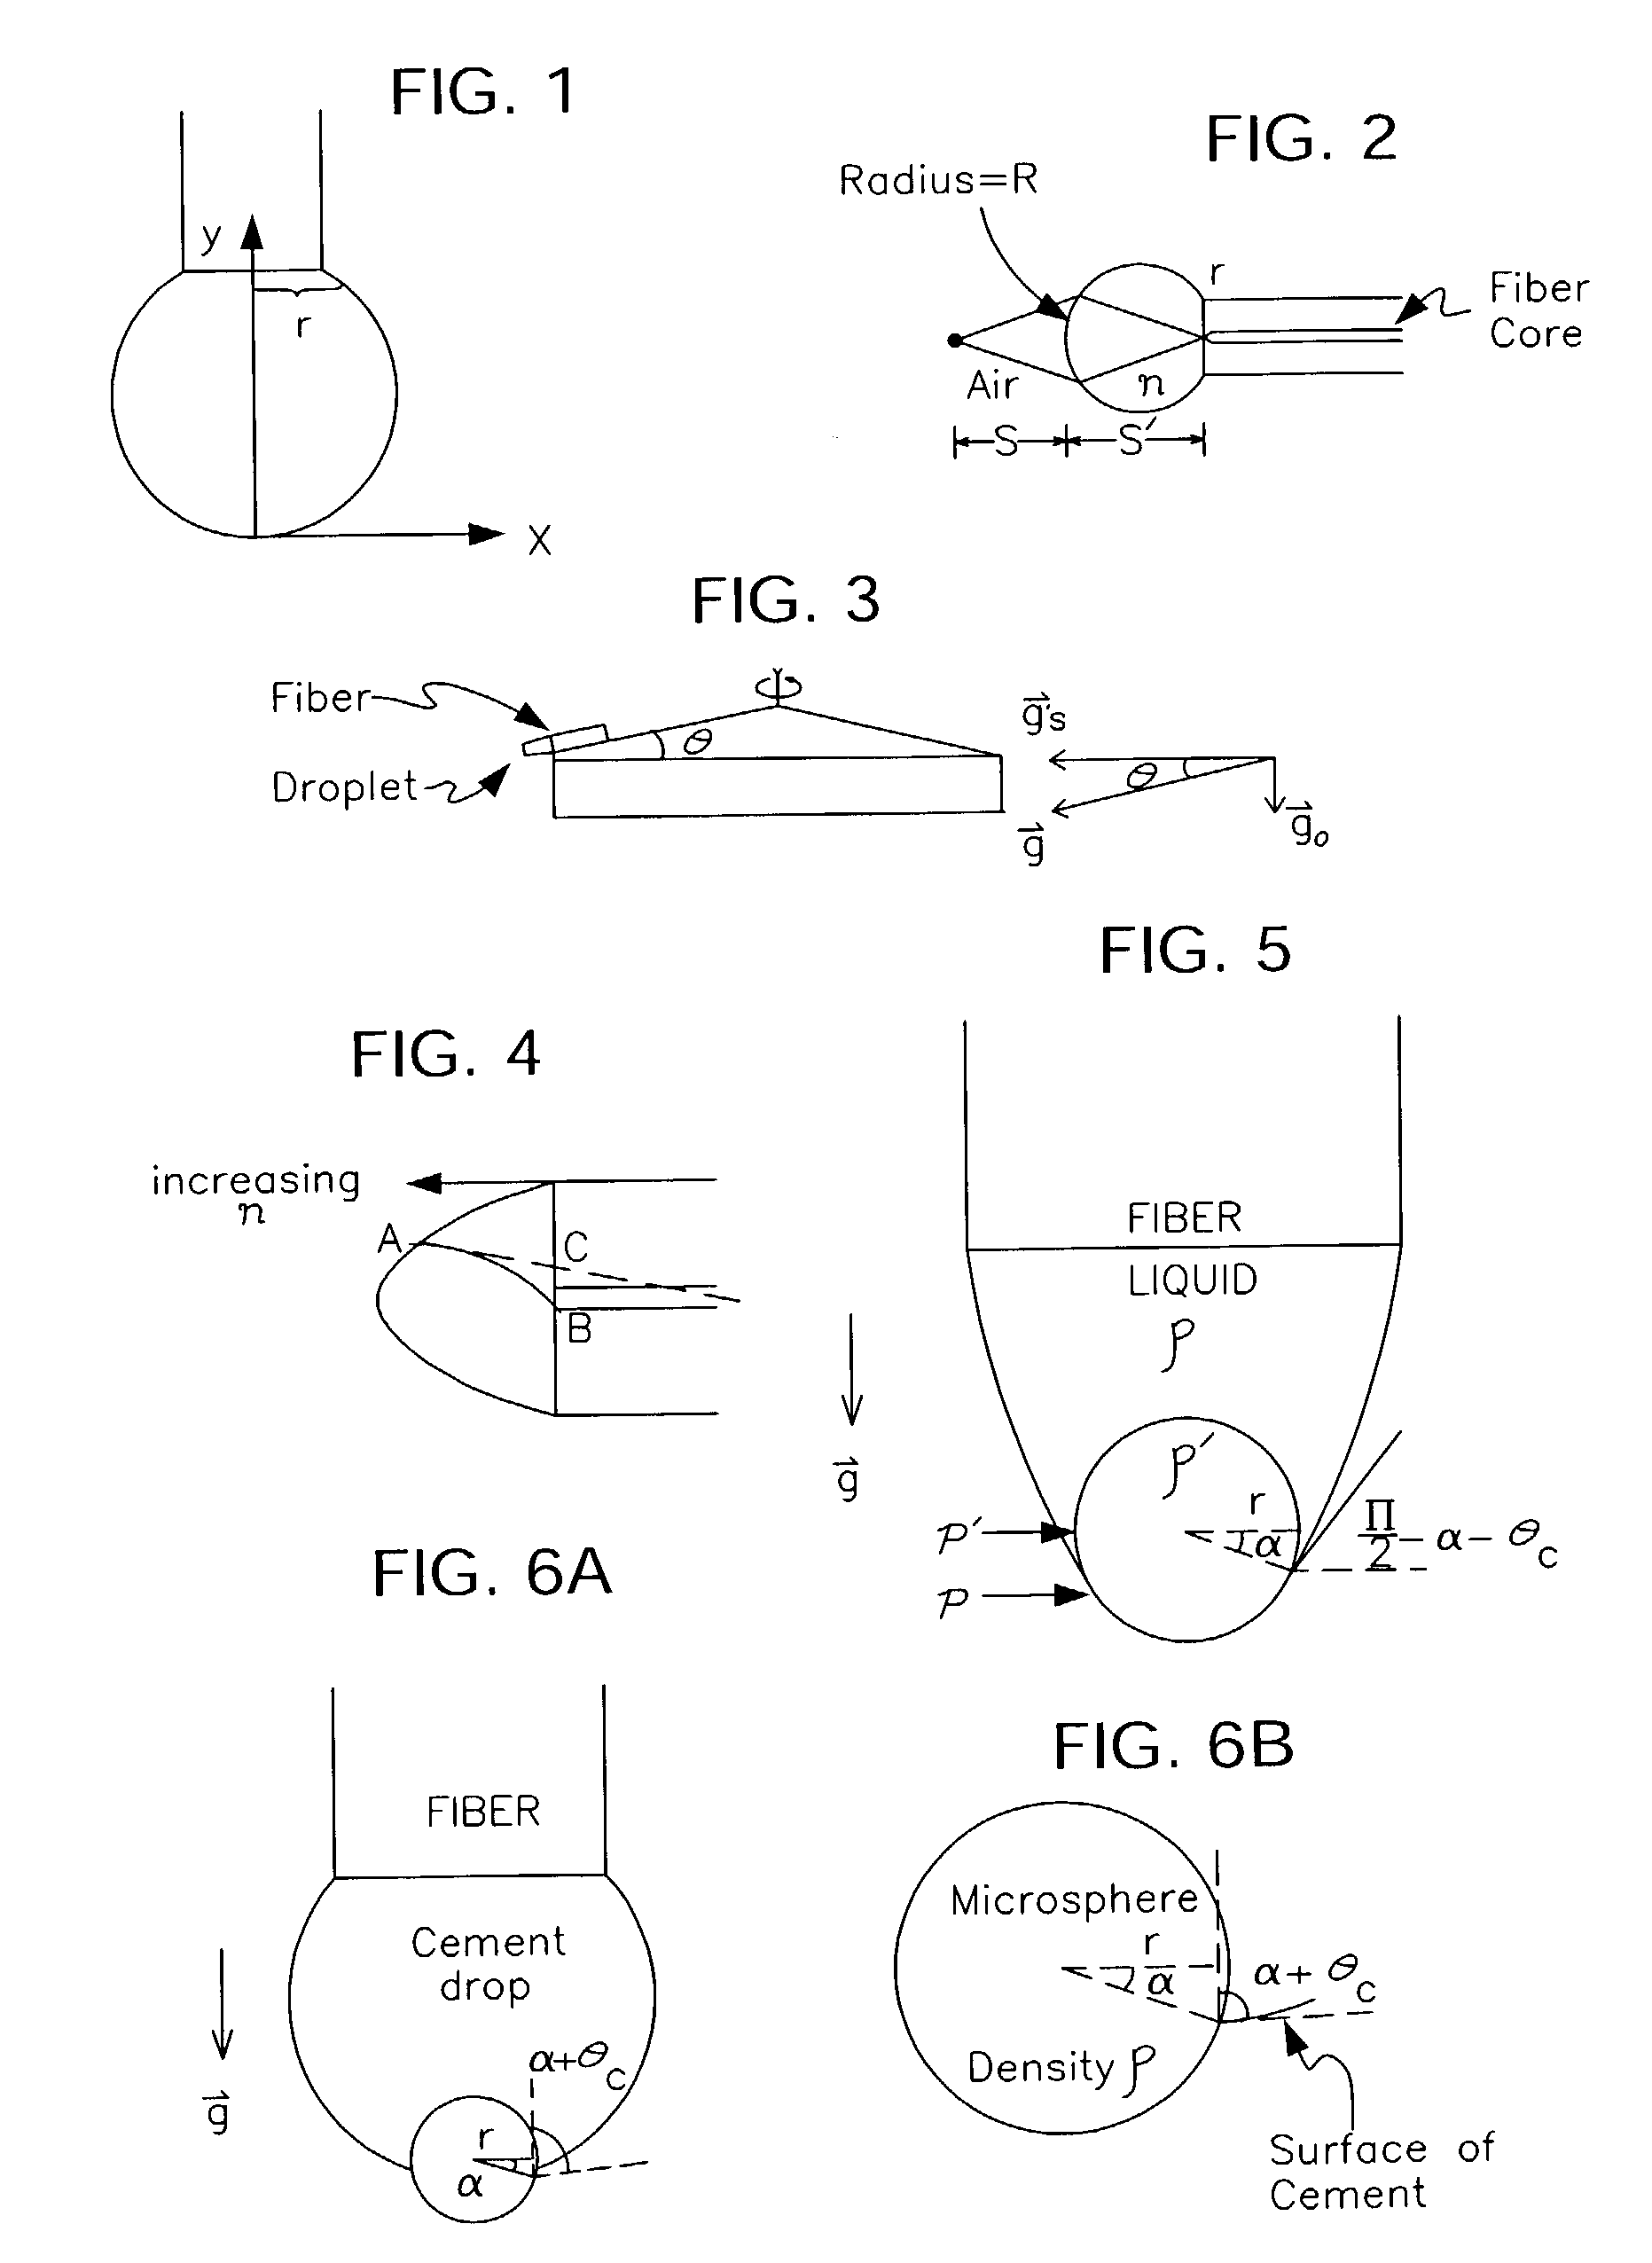 Methods for fabricating lenses at the end of optical fibers in the far field of the fiber aperture